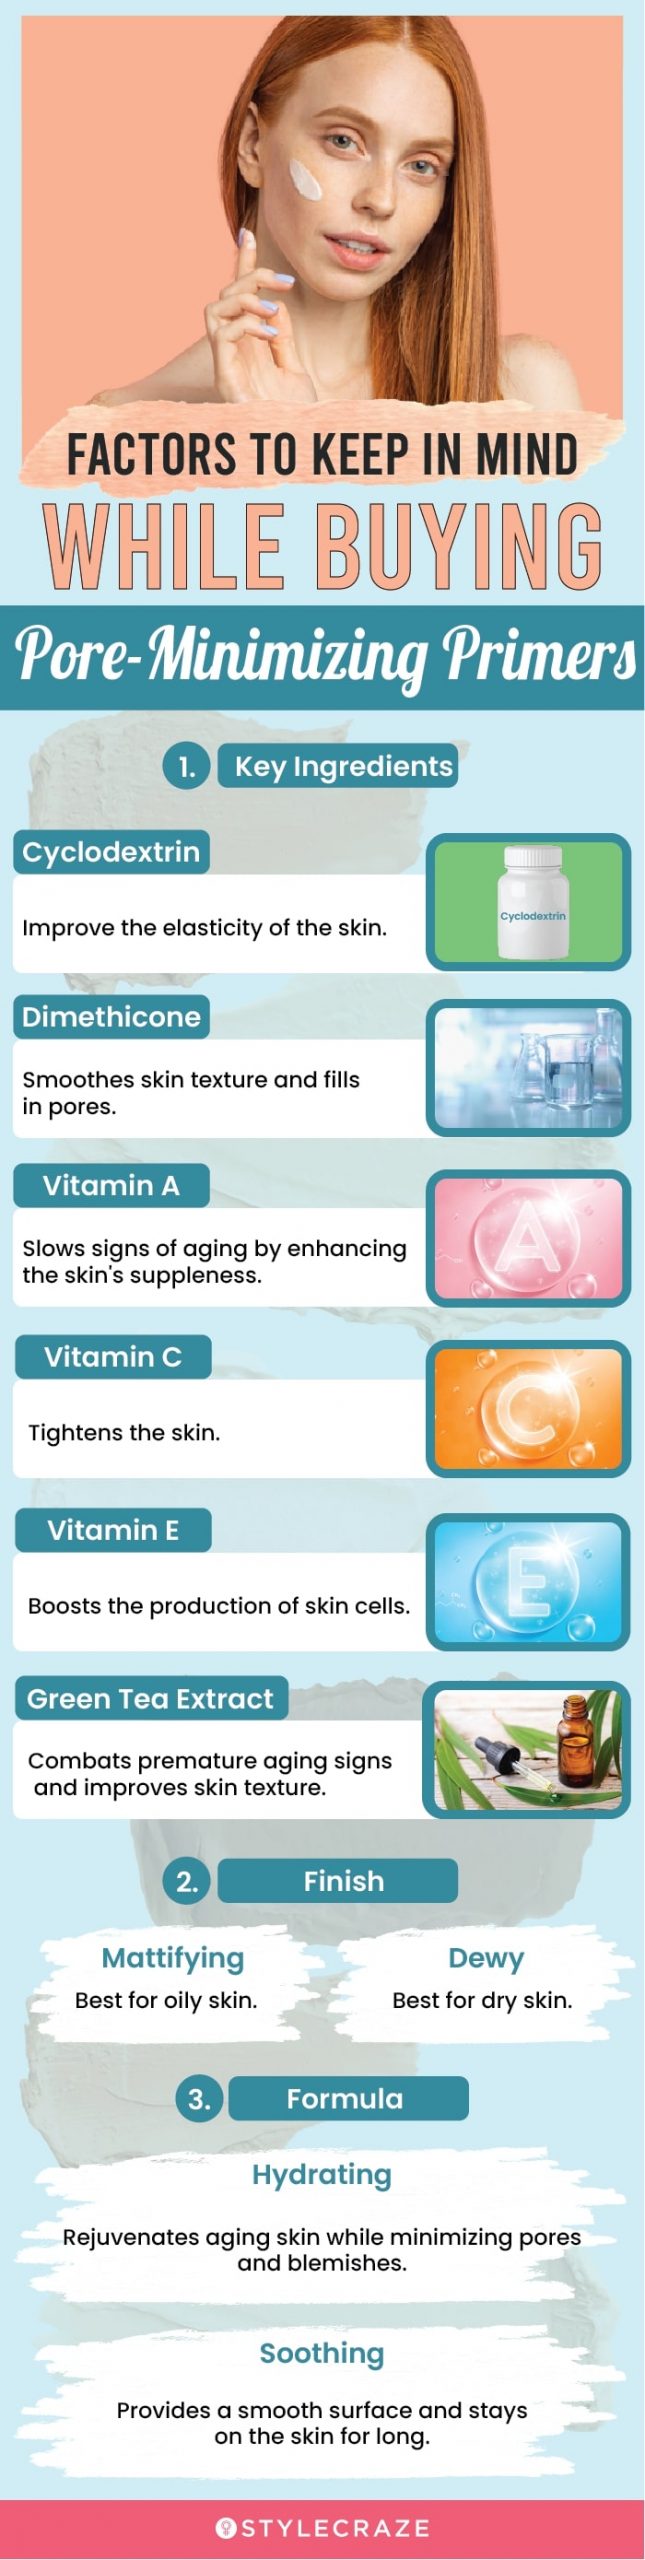 Factors To Keep In Mind While Buying Pore Minimizing Primer (infographic)